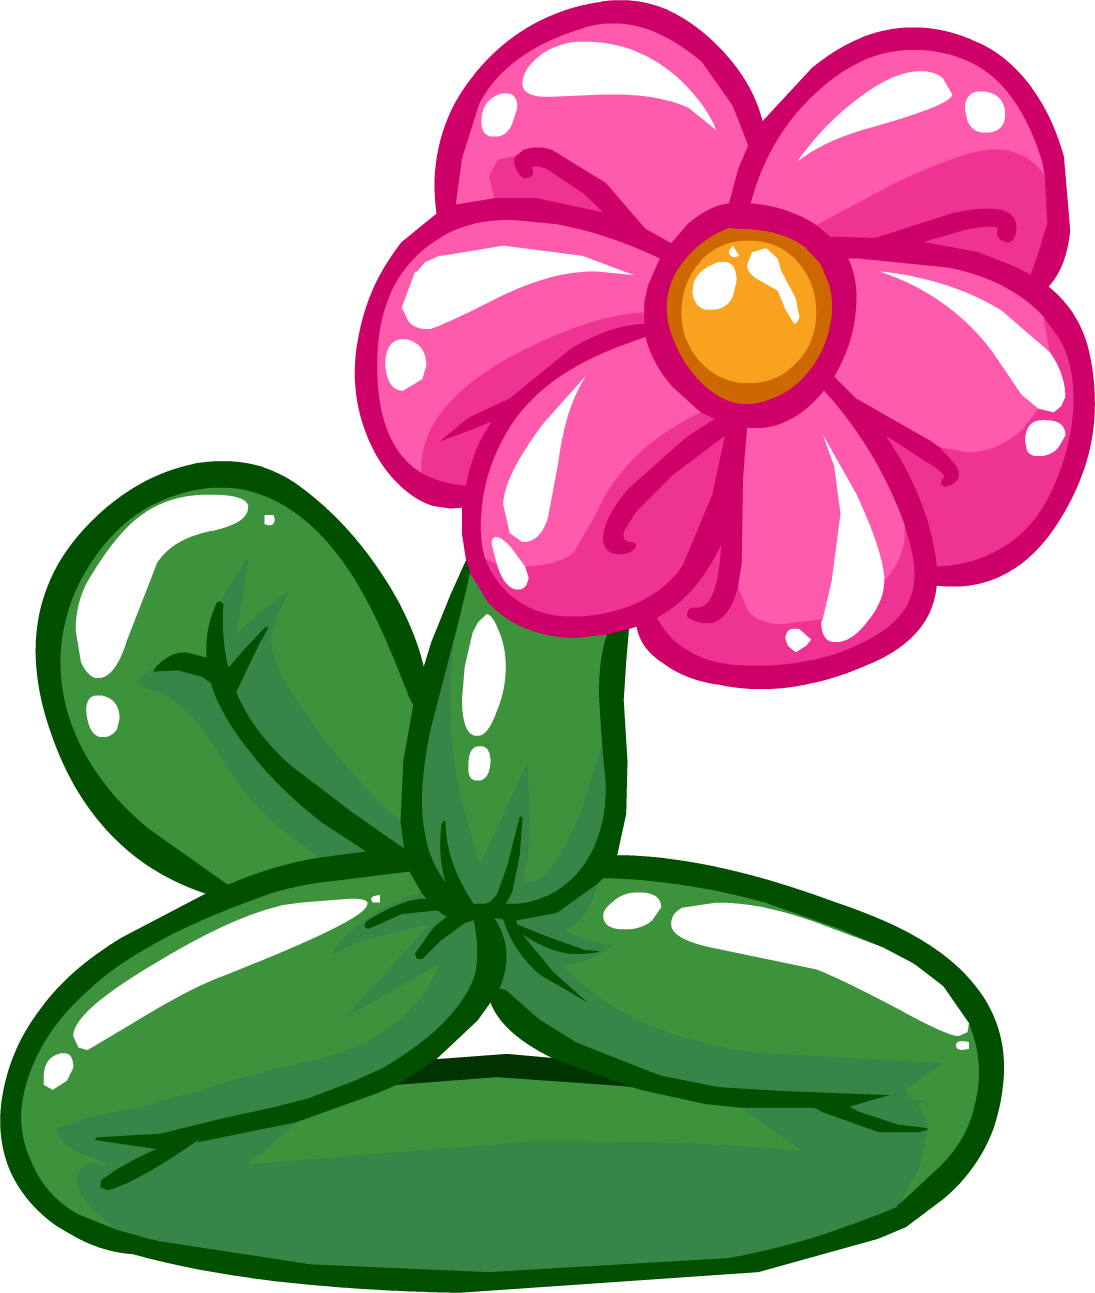 29, May 21, 2013 - Flower Balloon Clip Art (1095x1293), Png Download